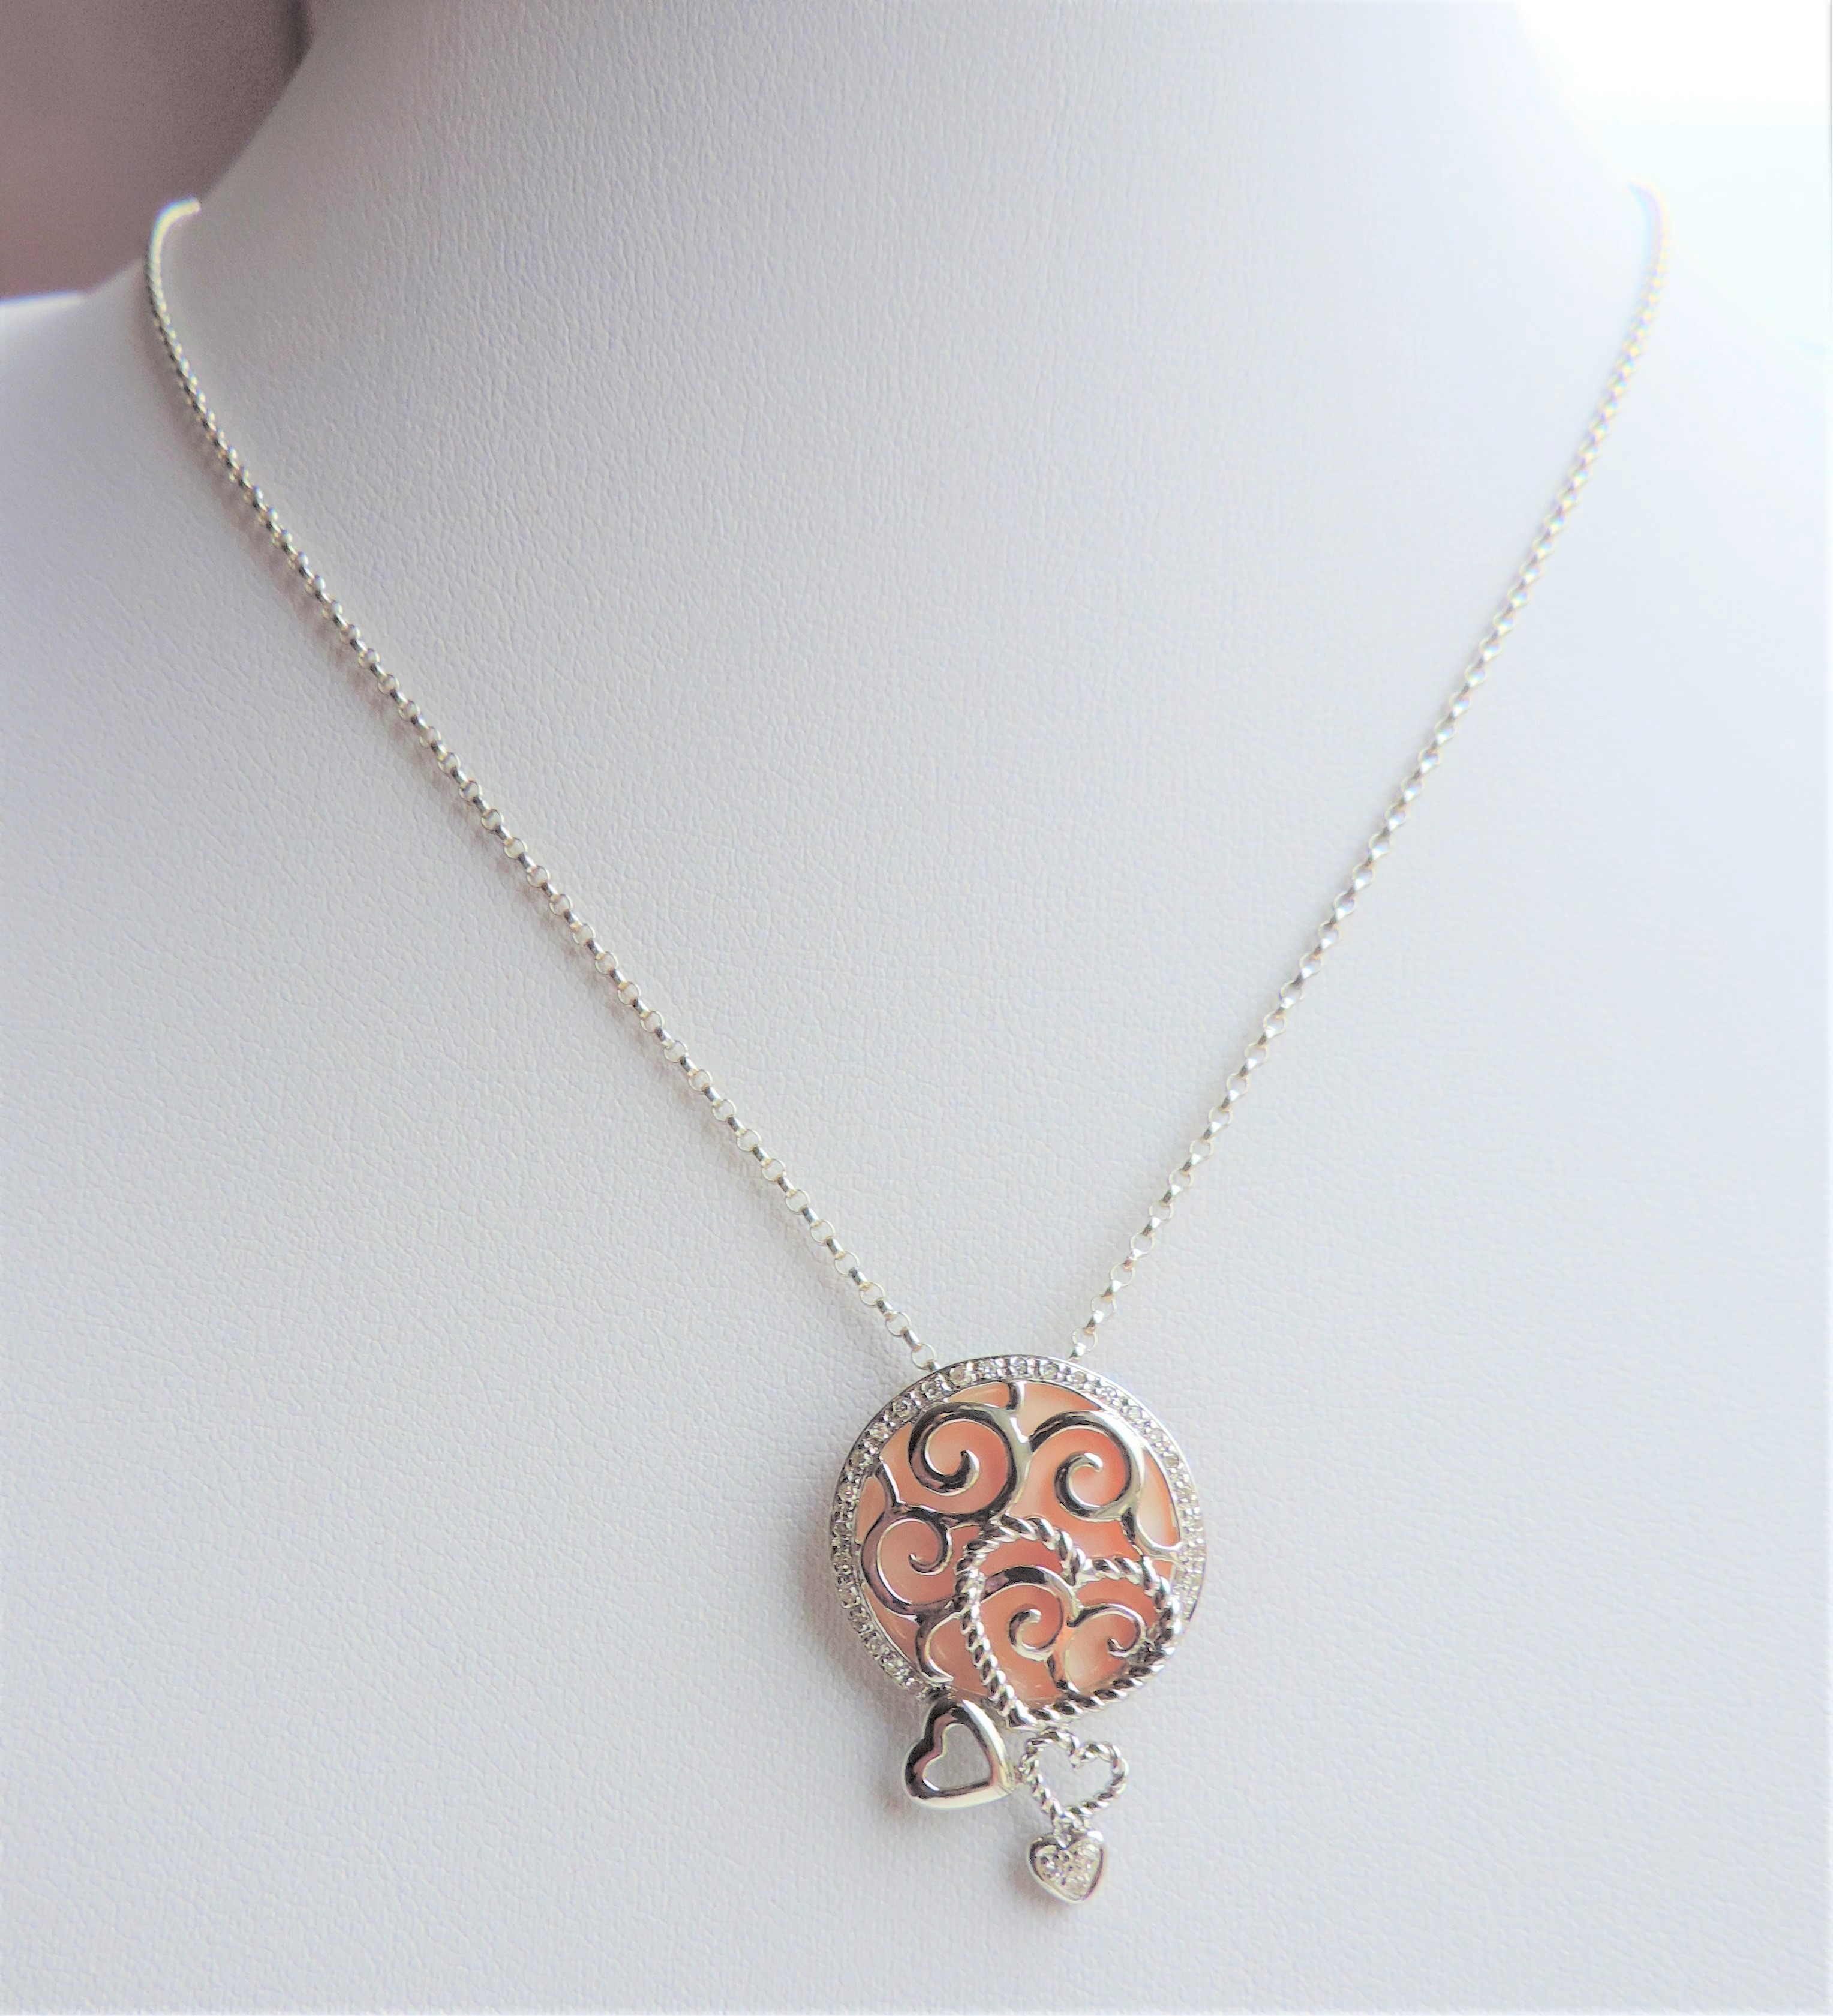 Sterling Silver Mother of Pearl Filigree Pendant Necklace - Image 2 of 3